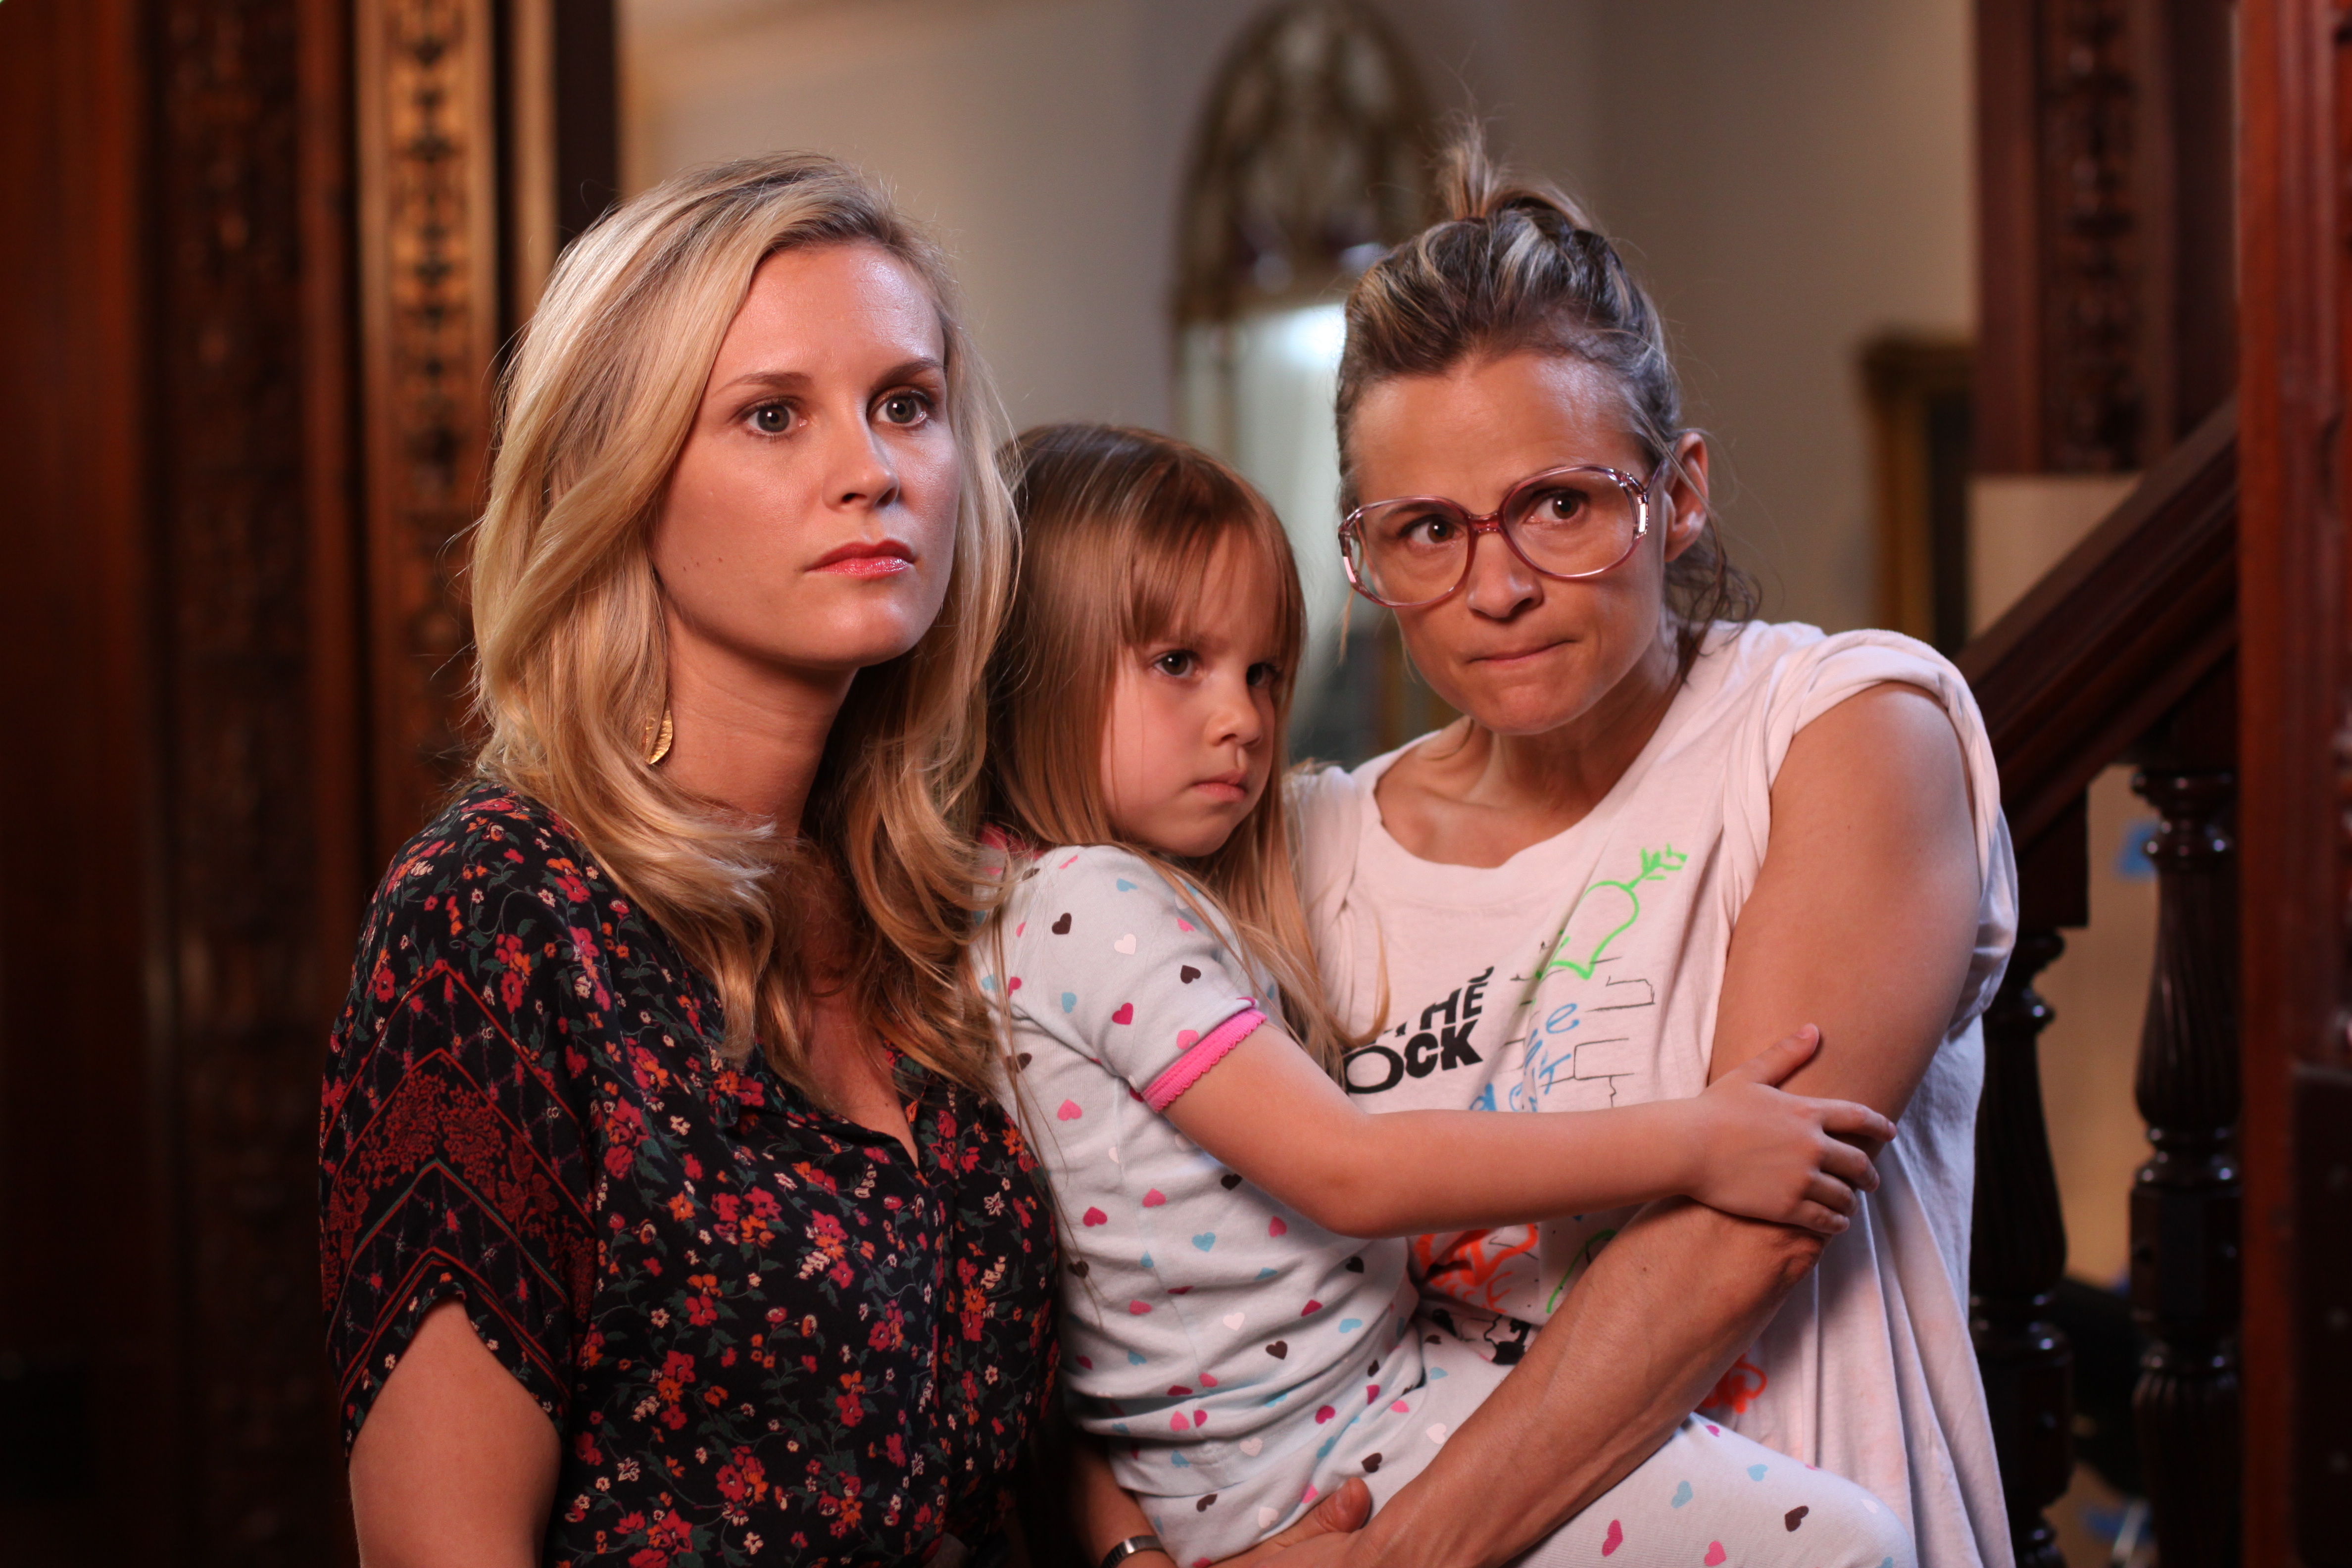 Still shot from The Best and the Brightest with Bonnie Somerville and Amy Sedaris.